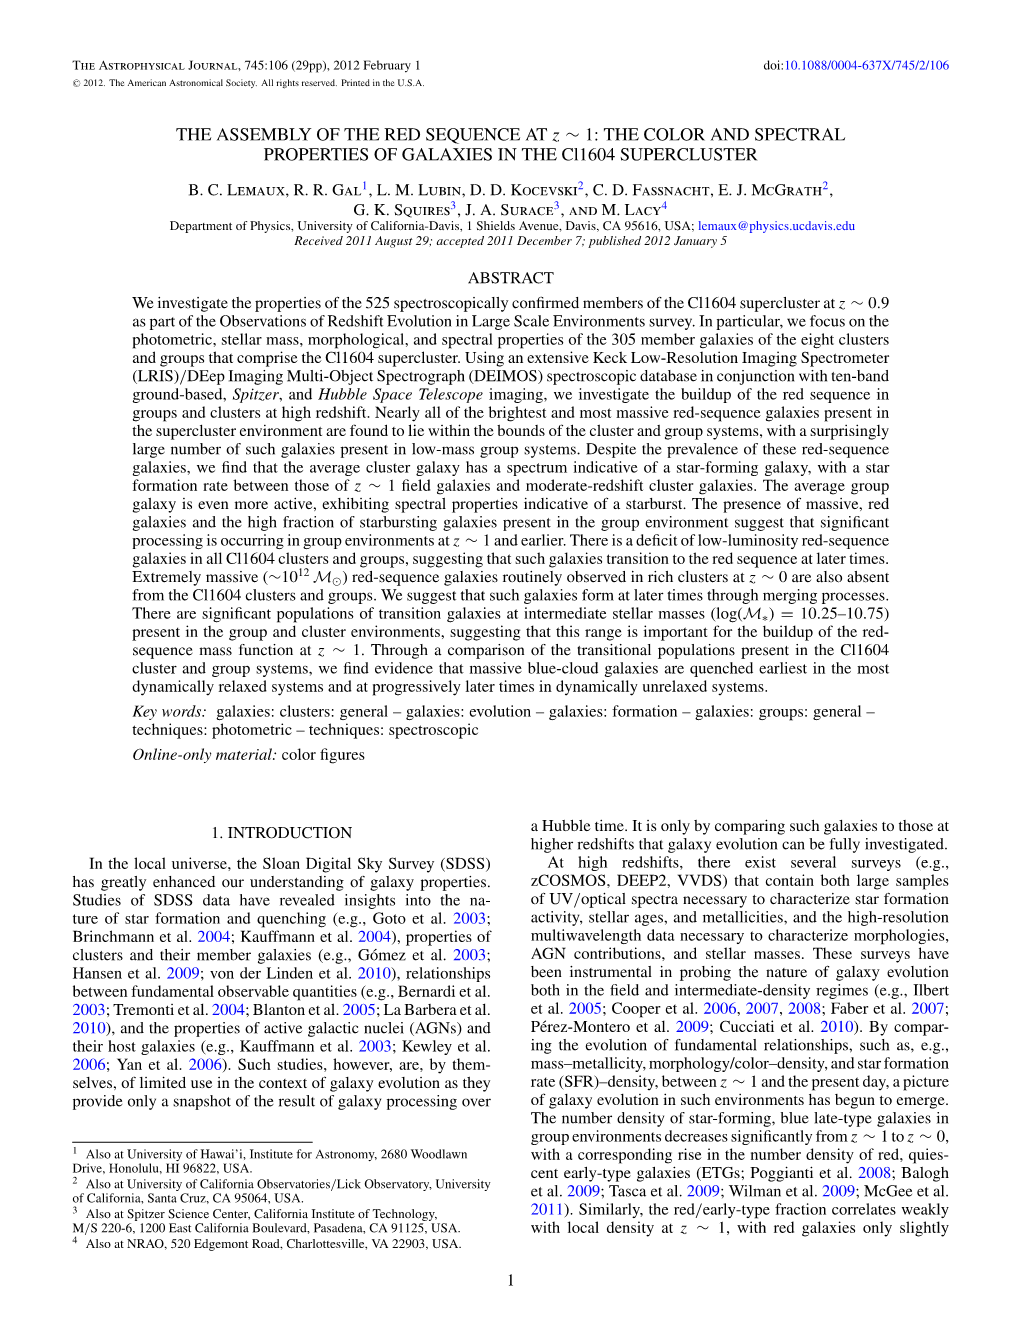 THE COLOR and SPECTRAL PROPERTIES of GALAXIES in the Cl1604 SUPERCLUSTER